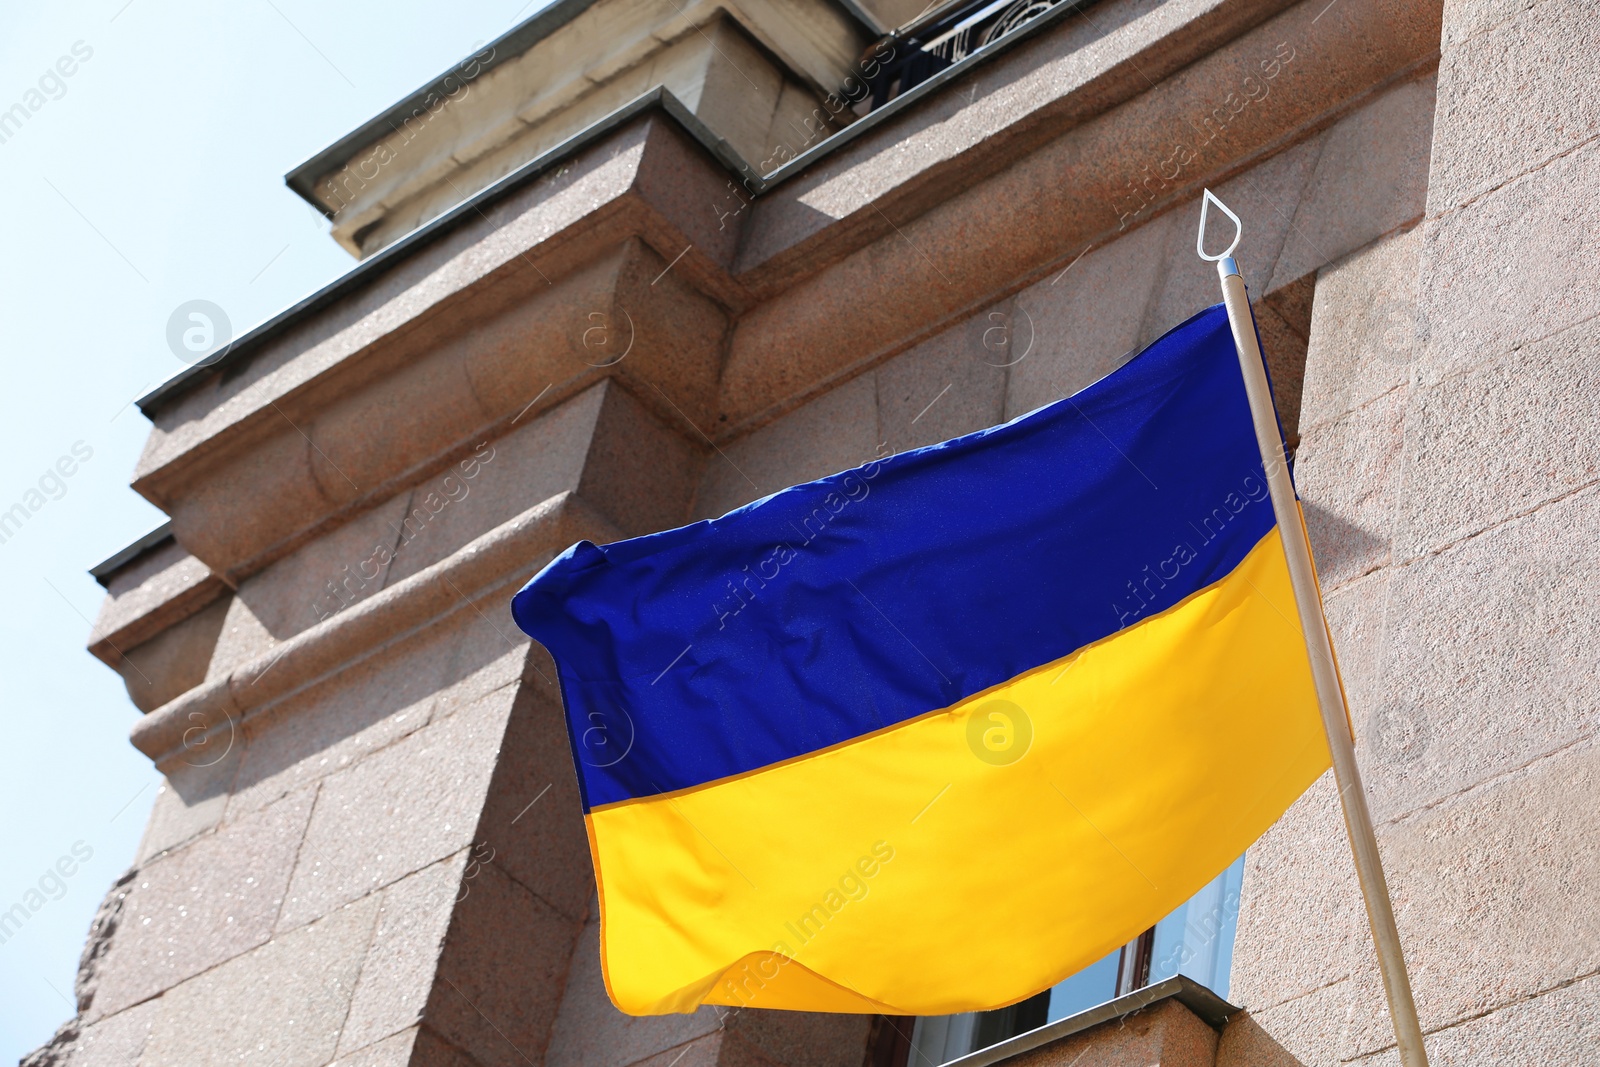 Photo of Flags of Ukraine and Mykolaiv on building facade